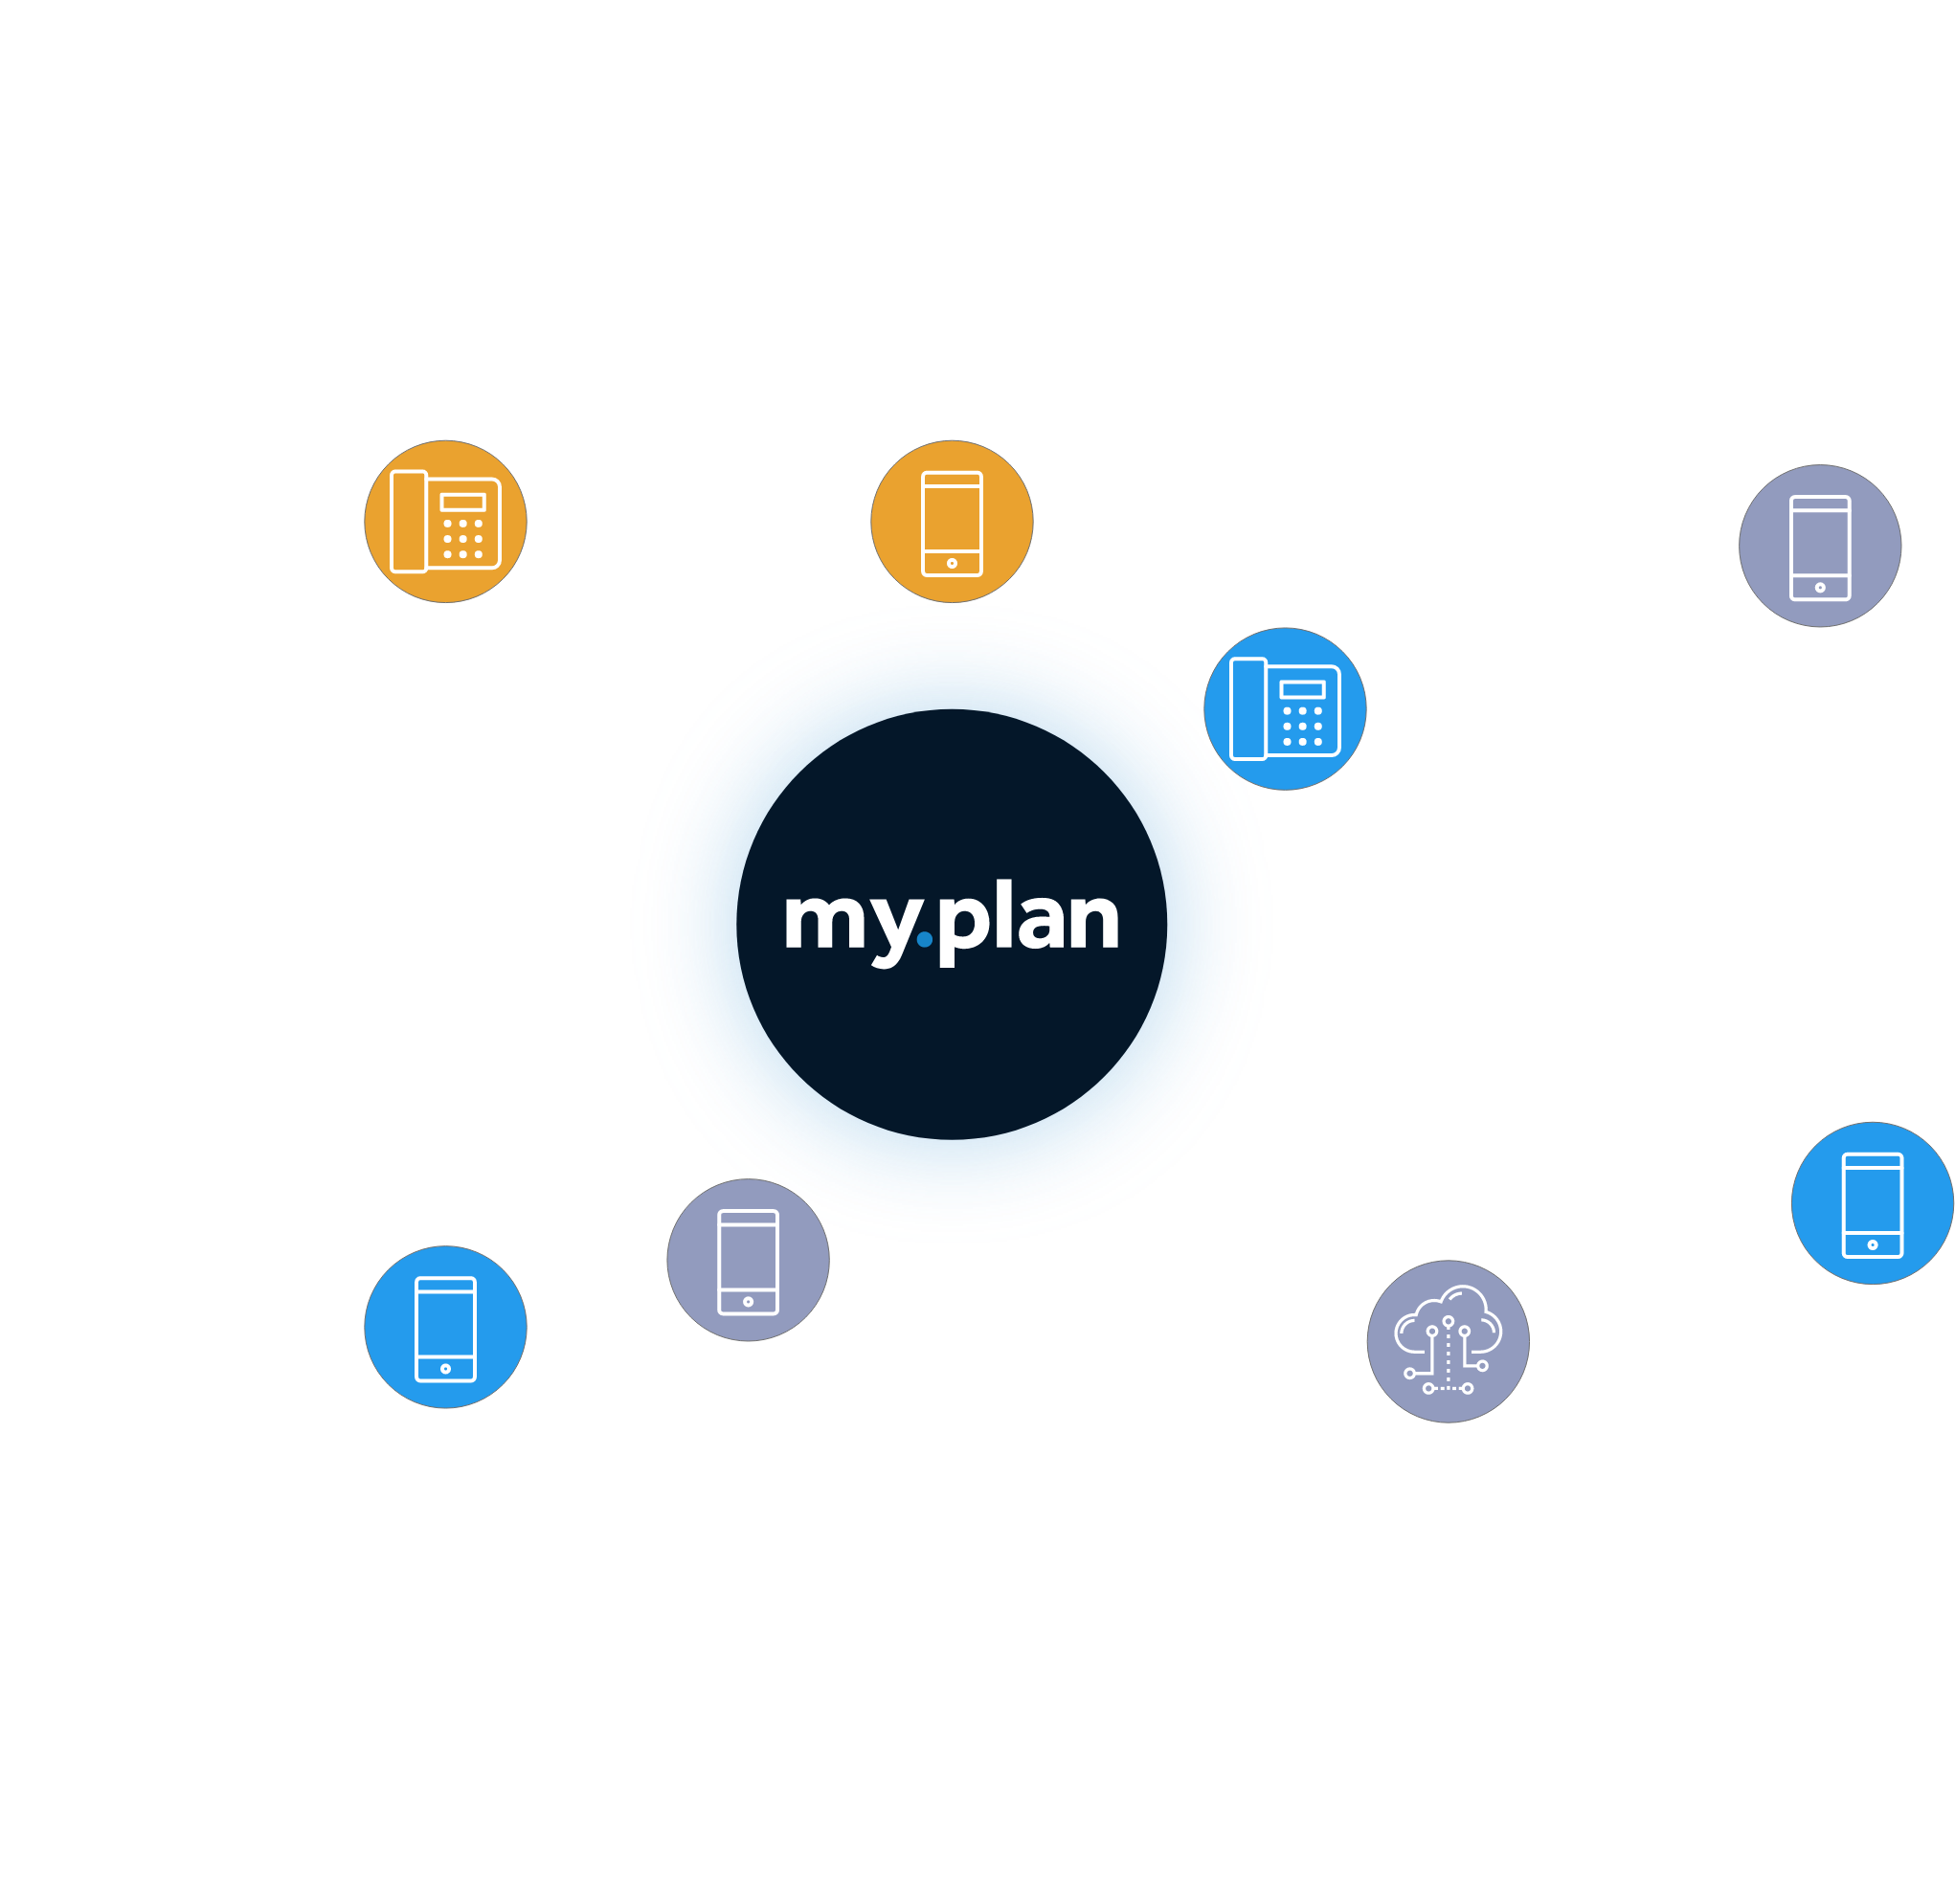 Find out more about my.plan